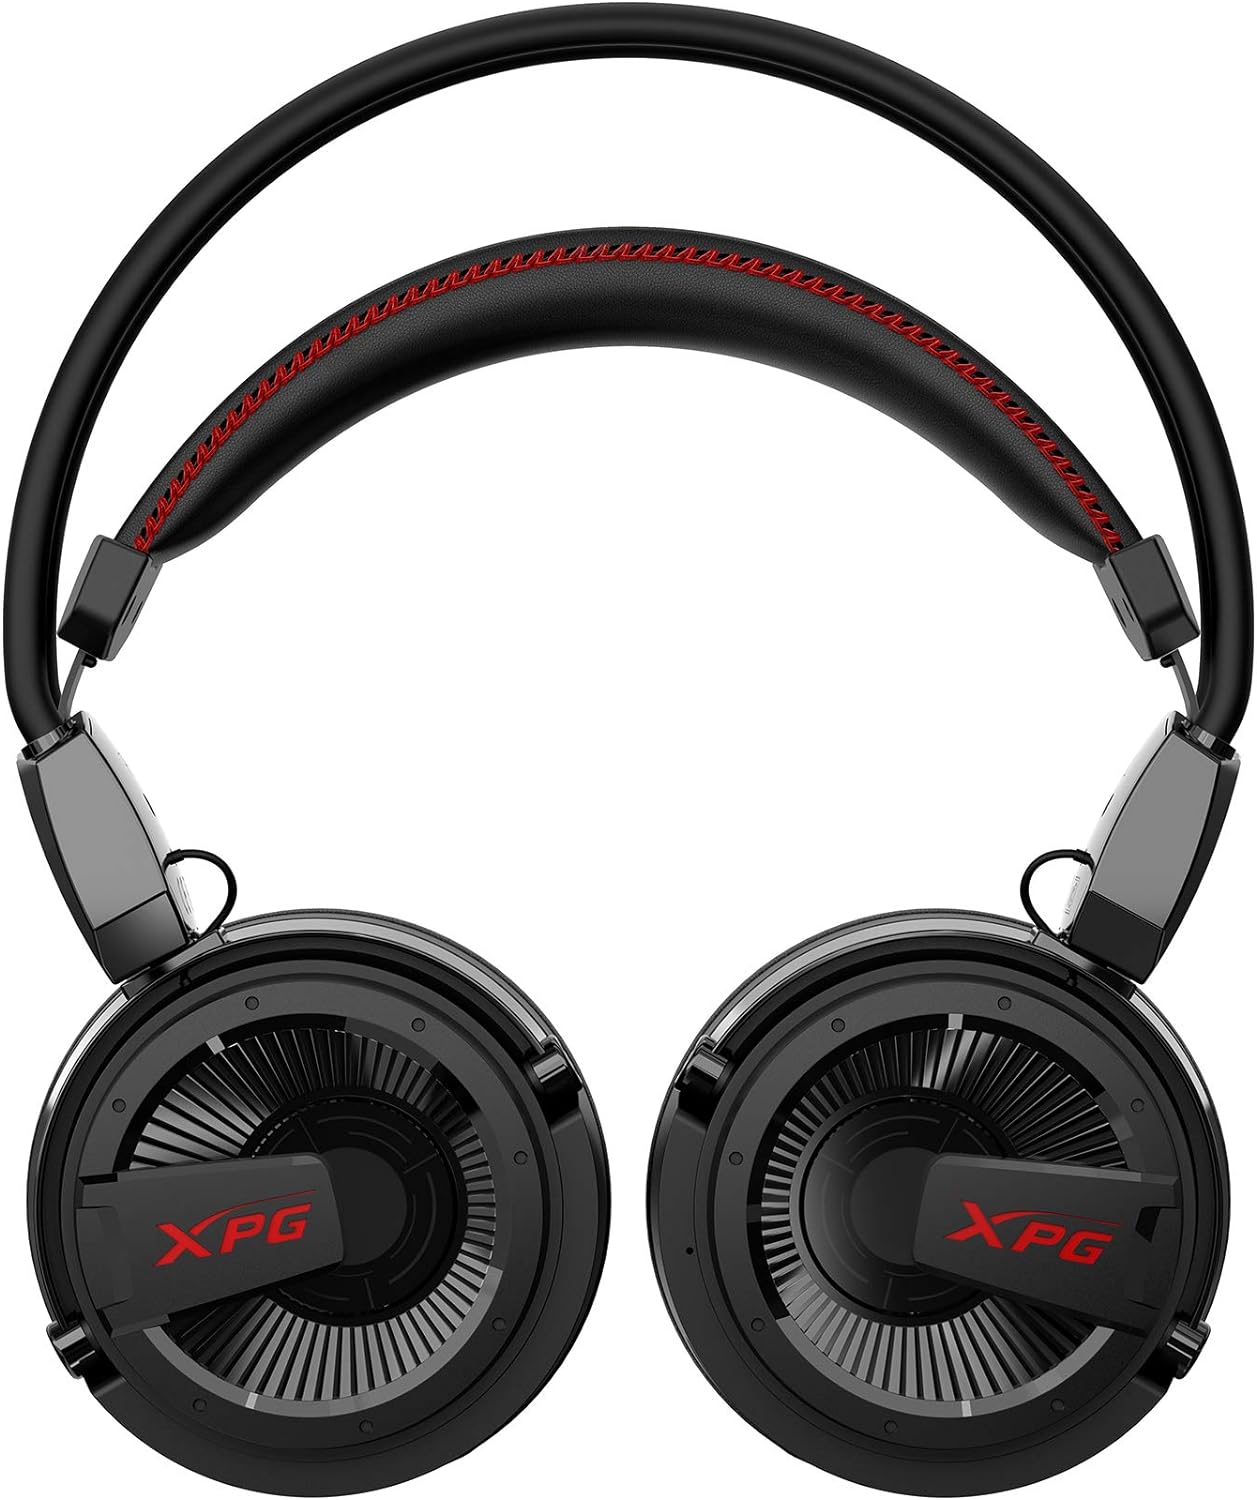 Xpg Precog Analog  Wired Headset with Microphone - Black